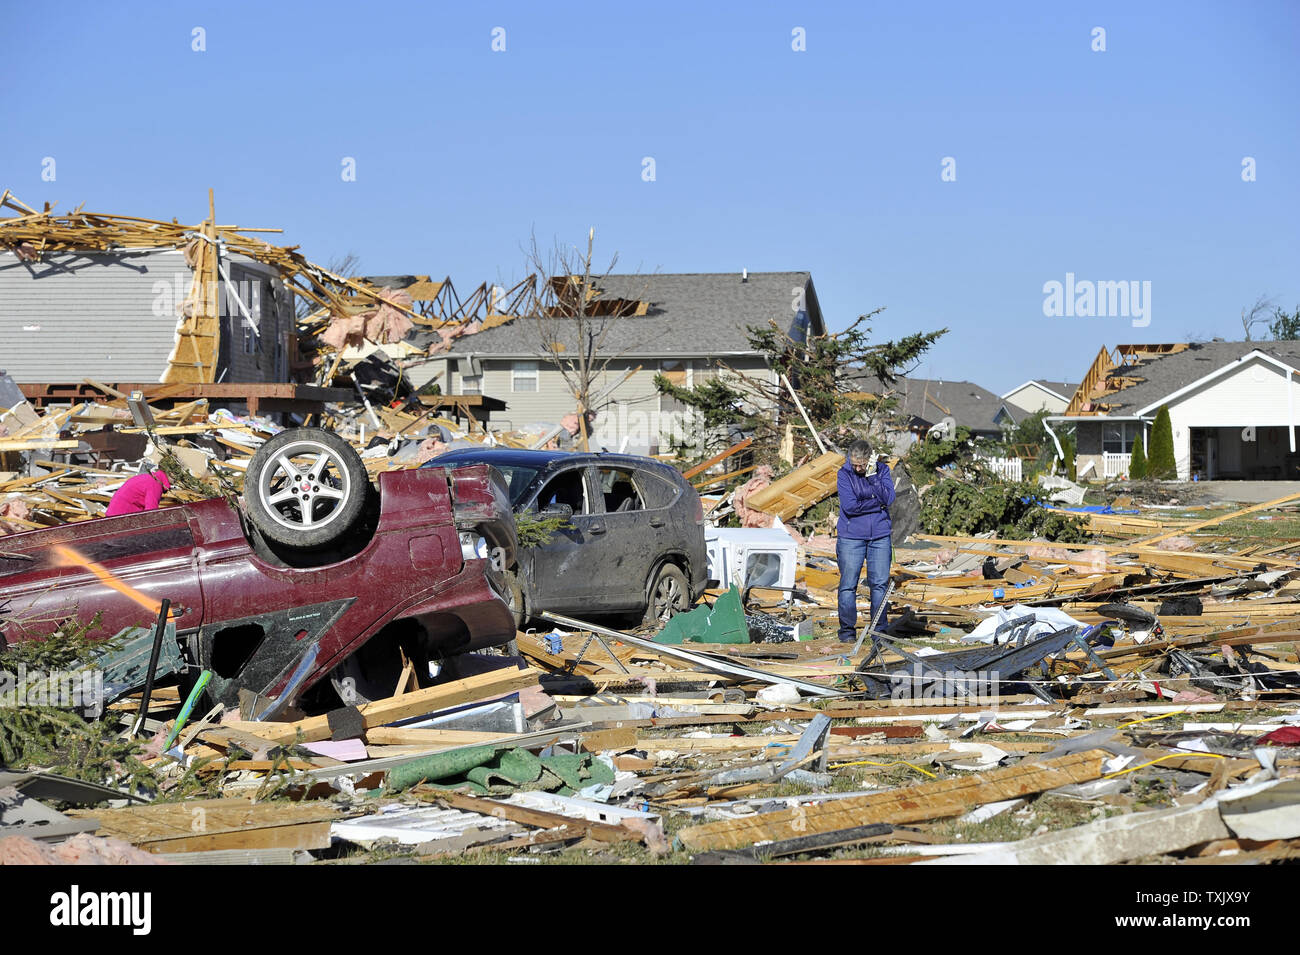 A resident sorts through the devastation in Washington, Illinois on November 18, 2013. Six people died and hundreds of homes were destroyed in Illinois as 81 tornadoes were sighted on November 17 throughout 12 midwest states including the EF4 tornado that struck Washington, Illinois.     UPI/Brian Kersey.     UPI/Brian Kersey Stock Photo